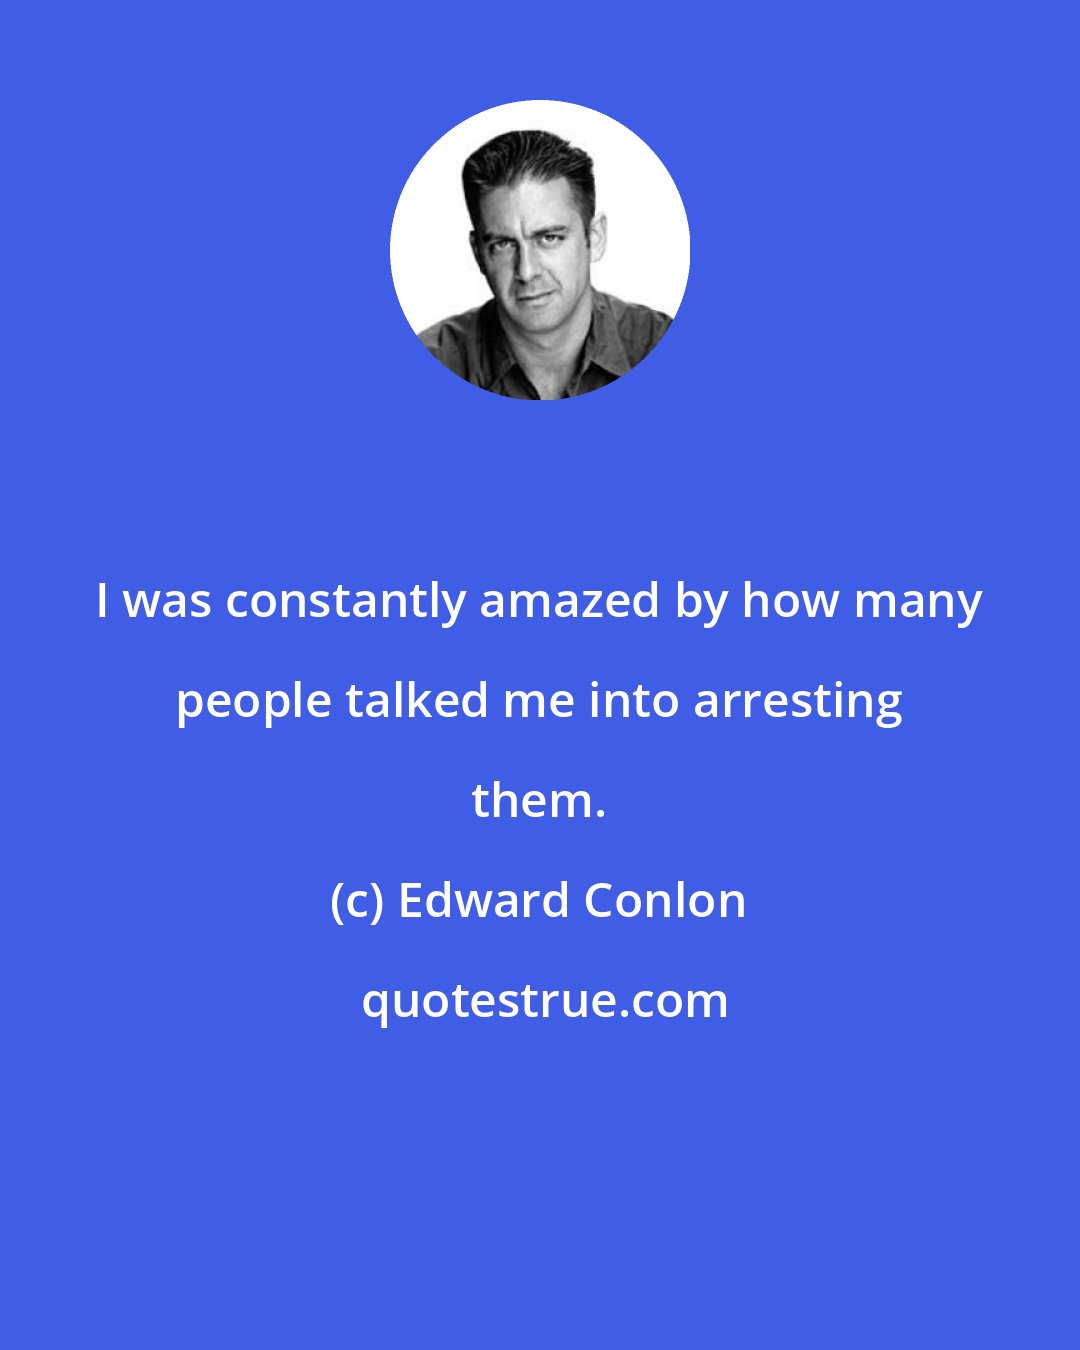 Edward Conlon: I was constantly amazed by how many people talked me into arresting them.